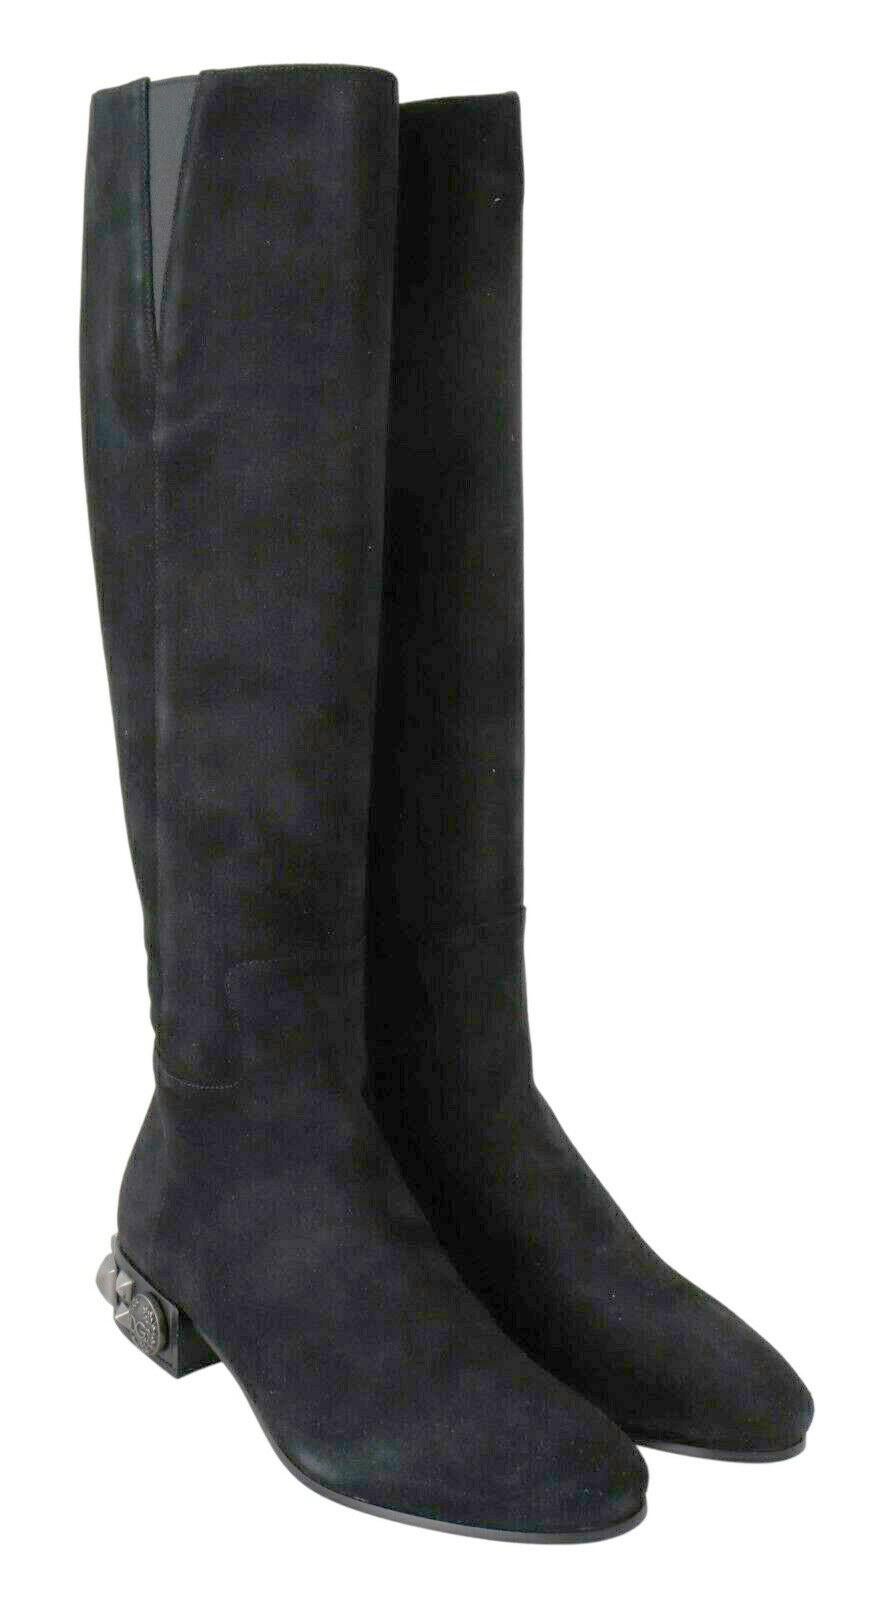 Dolce & Gabbana Black Suede Leather Flat Knee High Boots With Zipper DG Logo For Sale 2